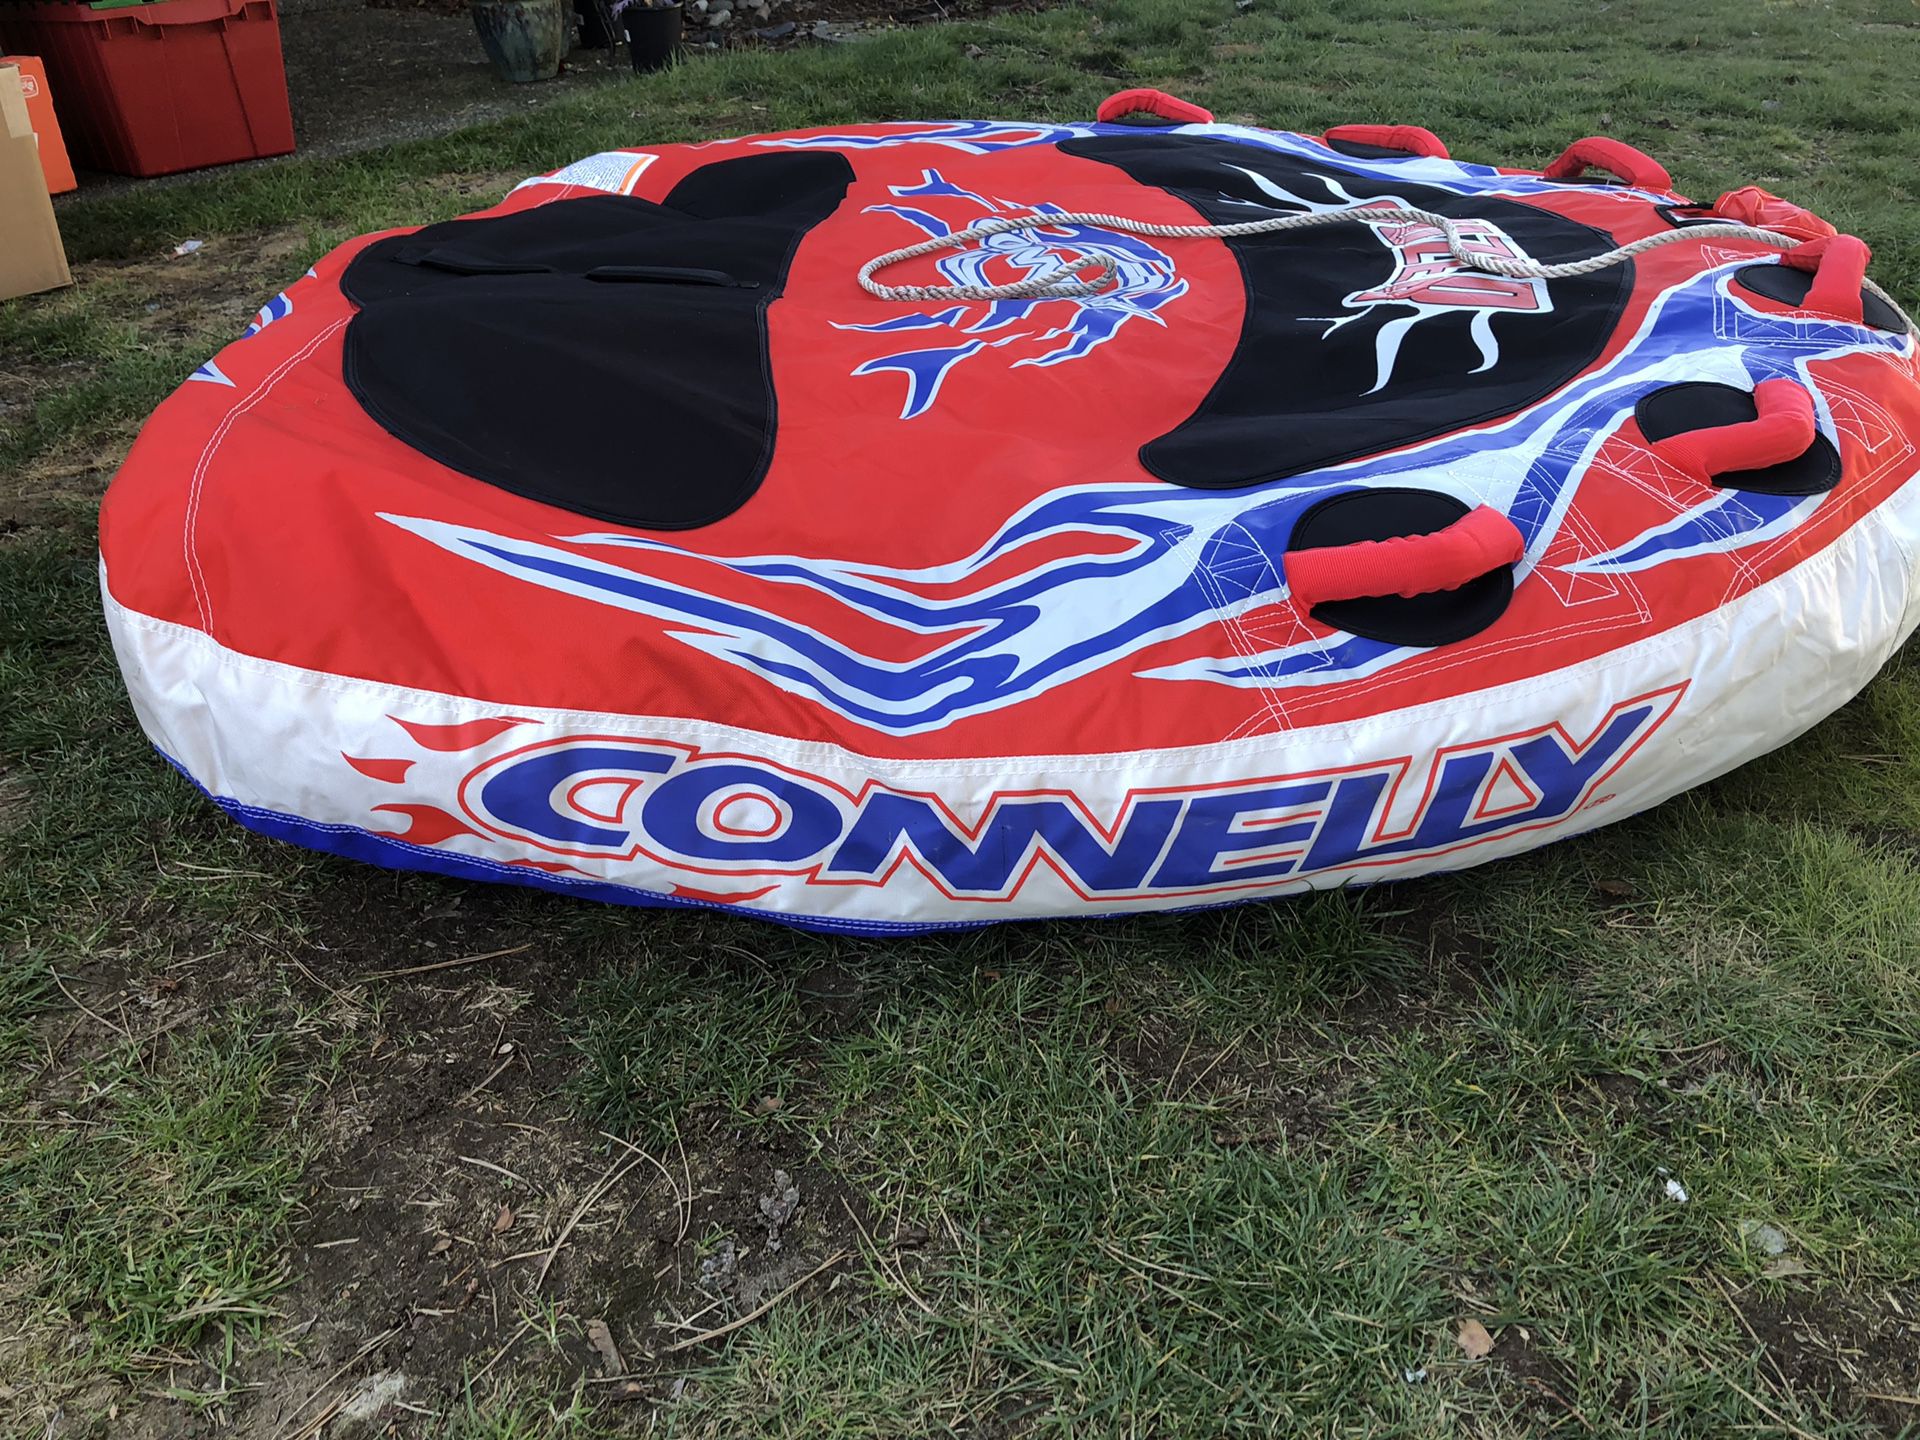 Connelly Inflatable Tube